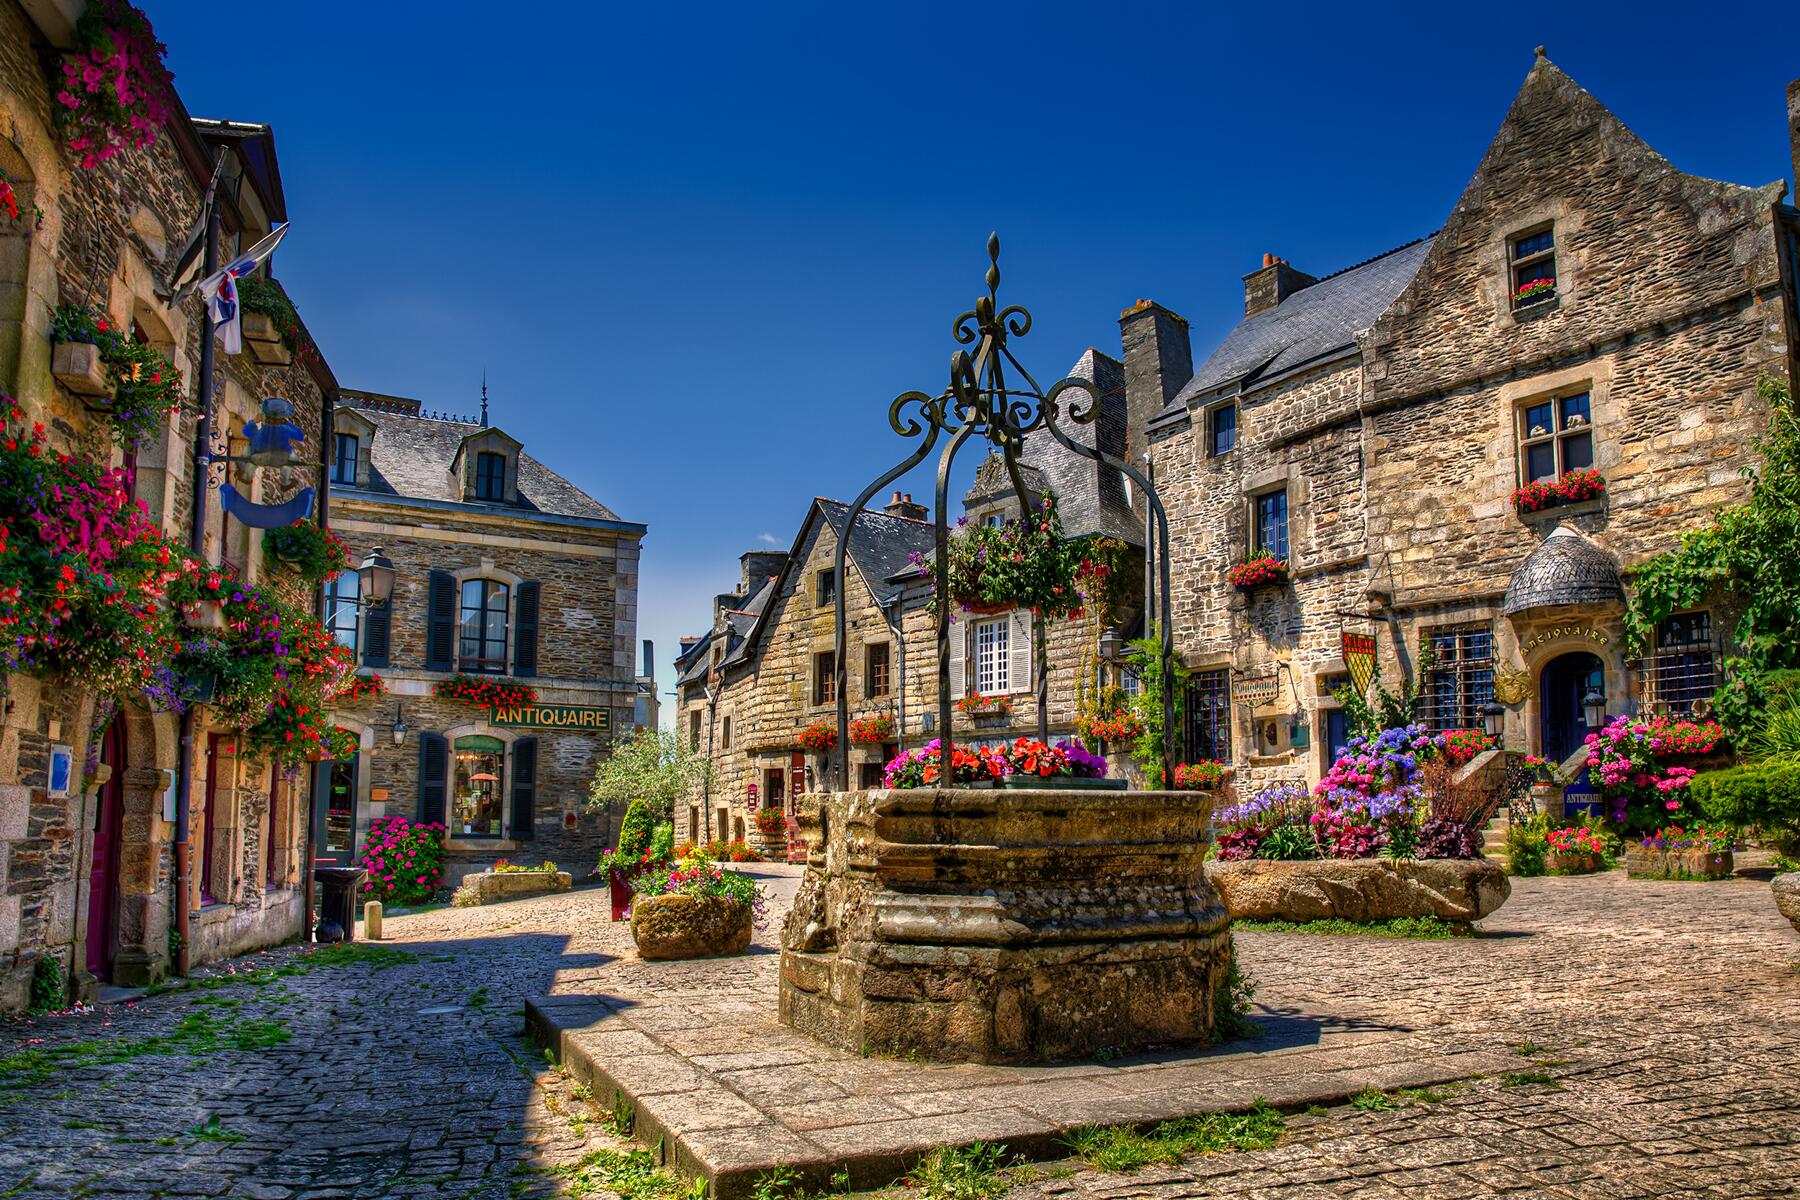 <a href='https://www.fodors.com/go-list/2020/europe#brittany'>Fodor’s Go List 2020: Brittany, France</a>